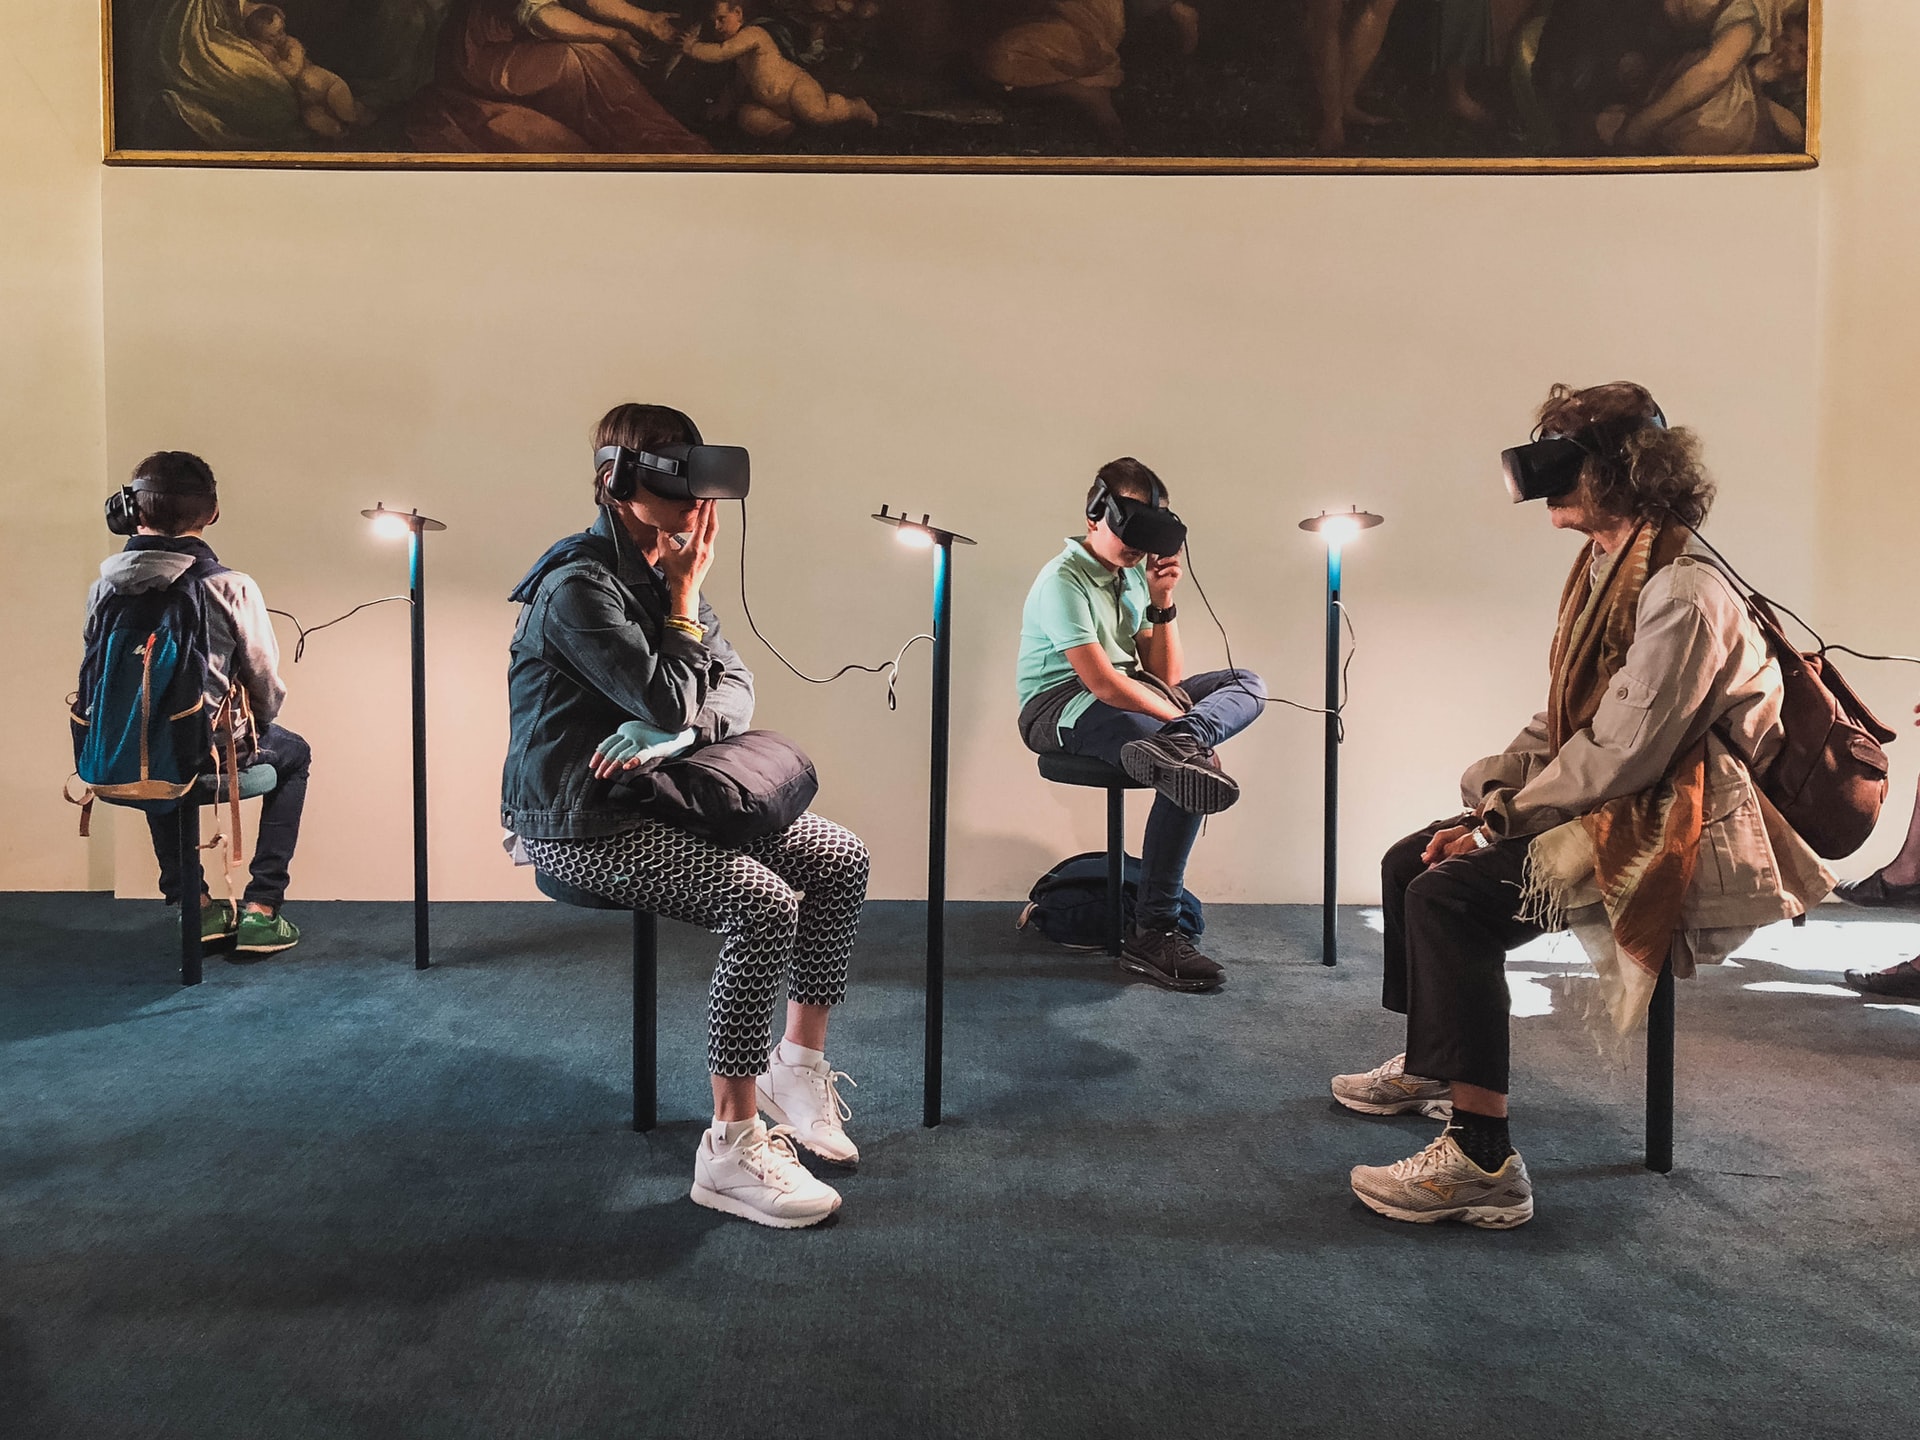 Canada Introduces World’s First Inclusive Work-Integrated Learning Program in VR